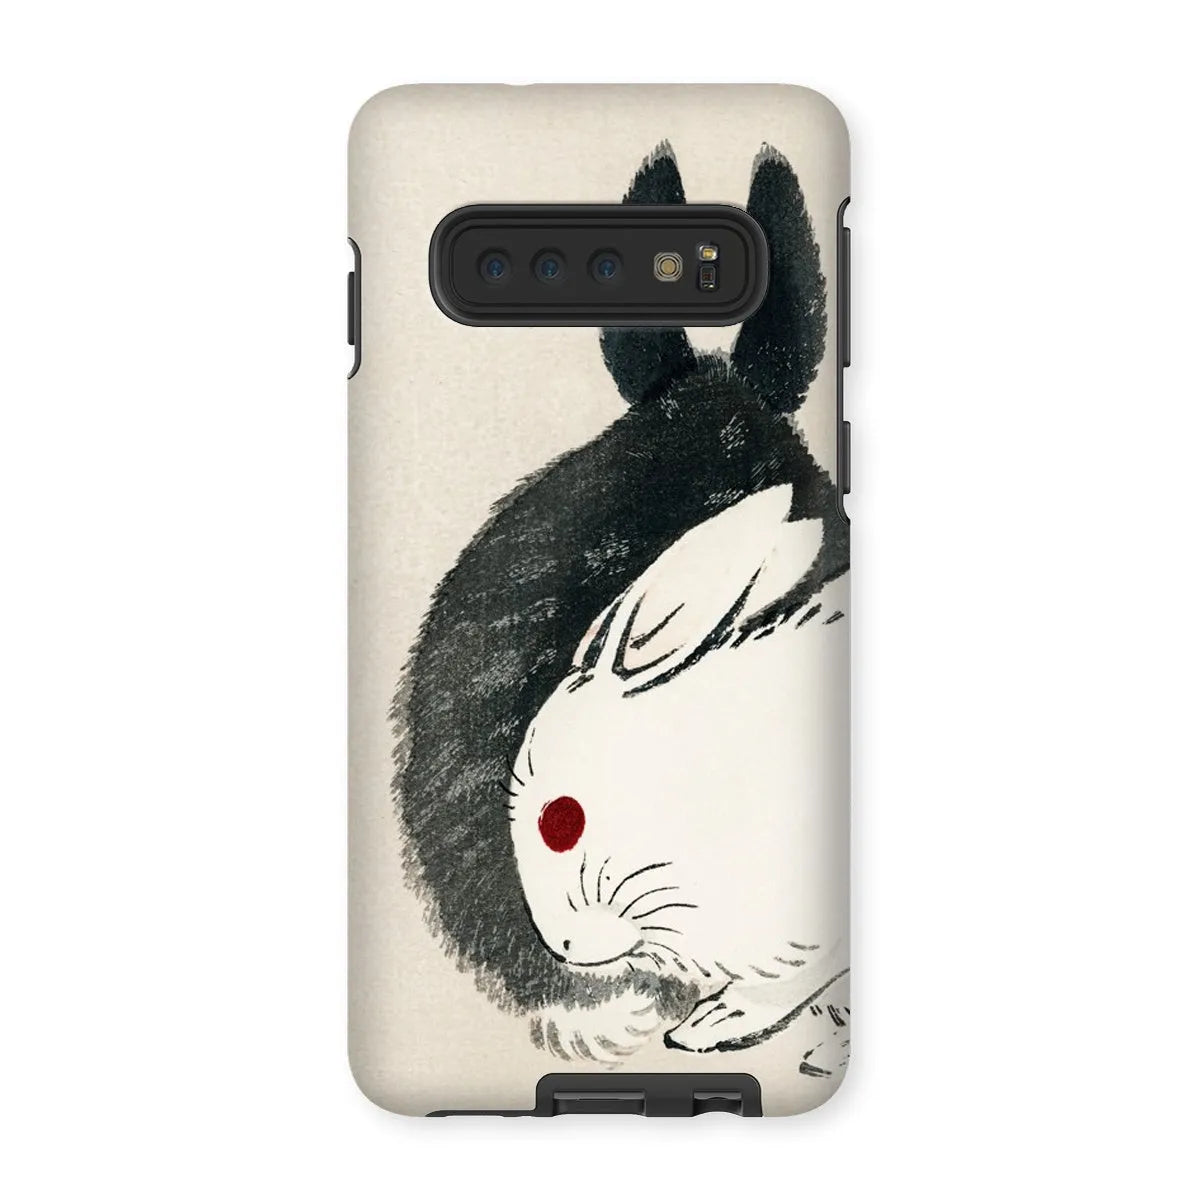 Rabbits - Black And White Meiji Art Phone Case - Kōno Bairei - Samsung Galaxy S10 / Matte - Mobile Phone Cases